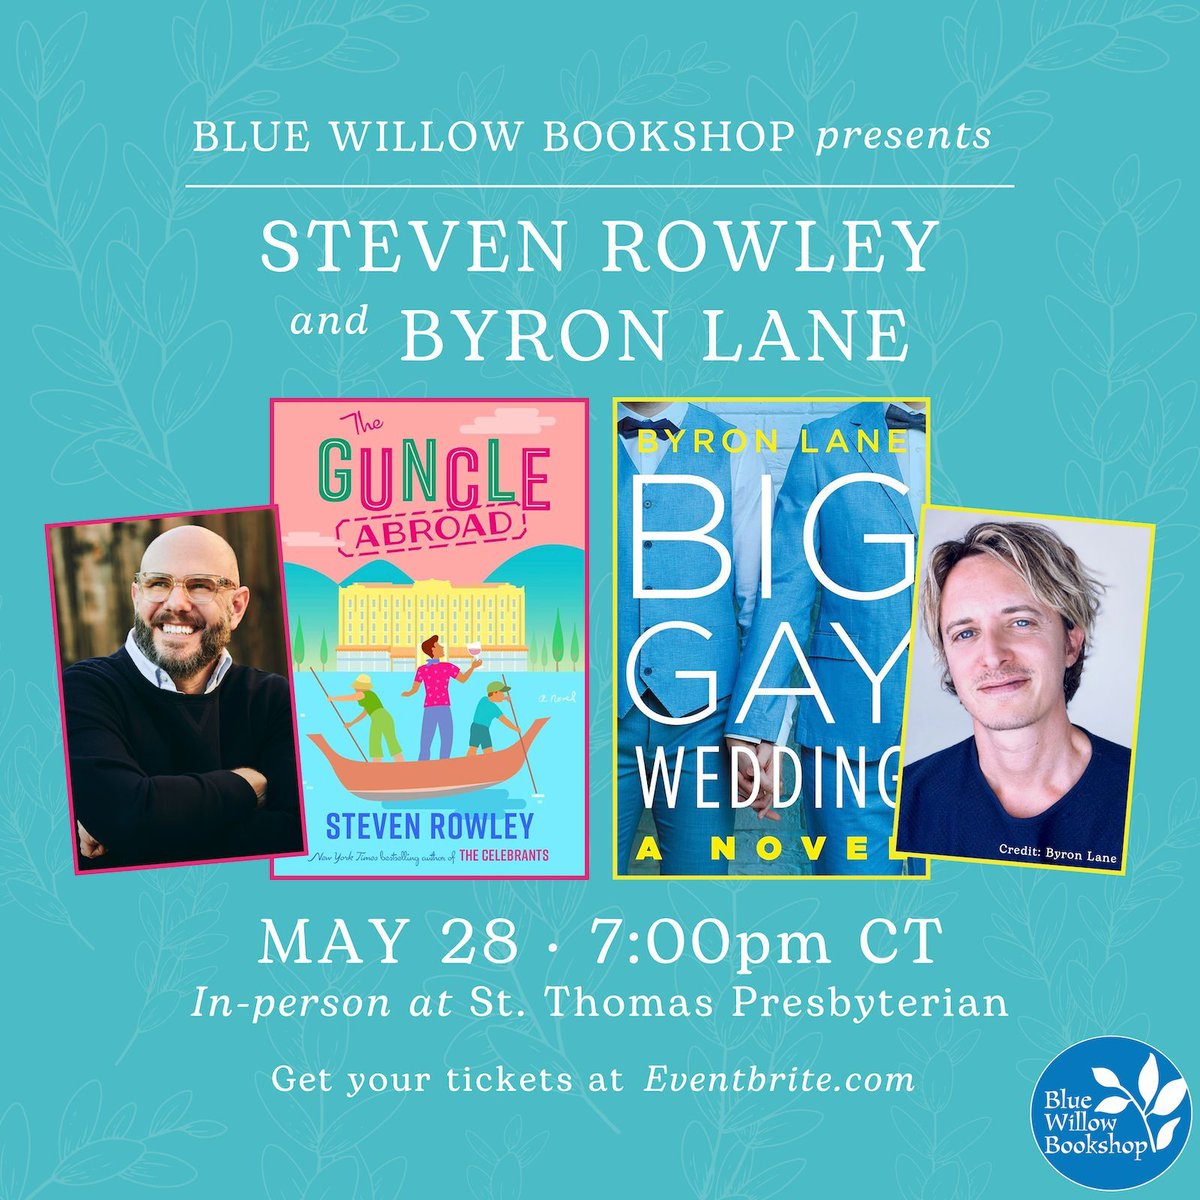 We can't wait to welcome Steven Rowley and @byronlane to #Houston for a joint event celebrating their books, THE GUNCLE ABROAD and BIG GAY WEDDING! 🌈📘 Tickets are available now—don't miss this one, friends! bluewillowbookshop.com/event/rowley-l… @PutnamBooks @HenryHolt